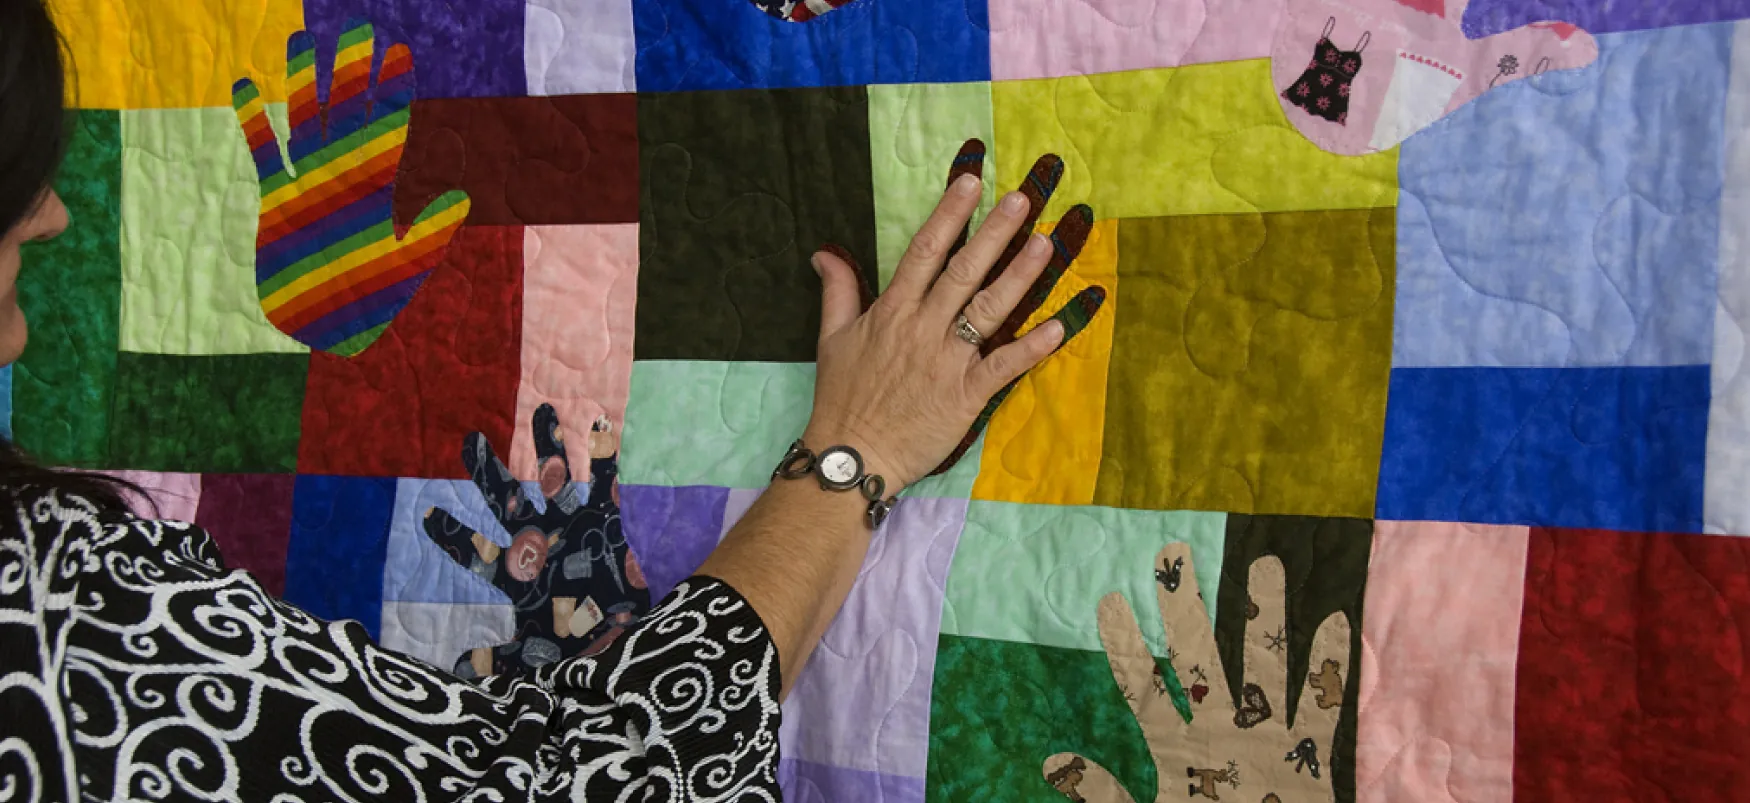 A hand touches a patchwork quilt. In addition to the traditional squares, the quilt has hand-shaped pieces.